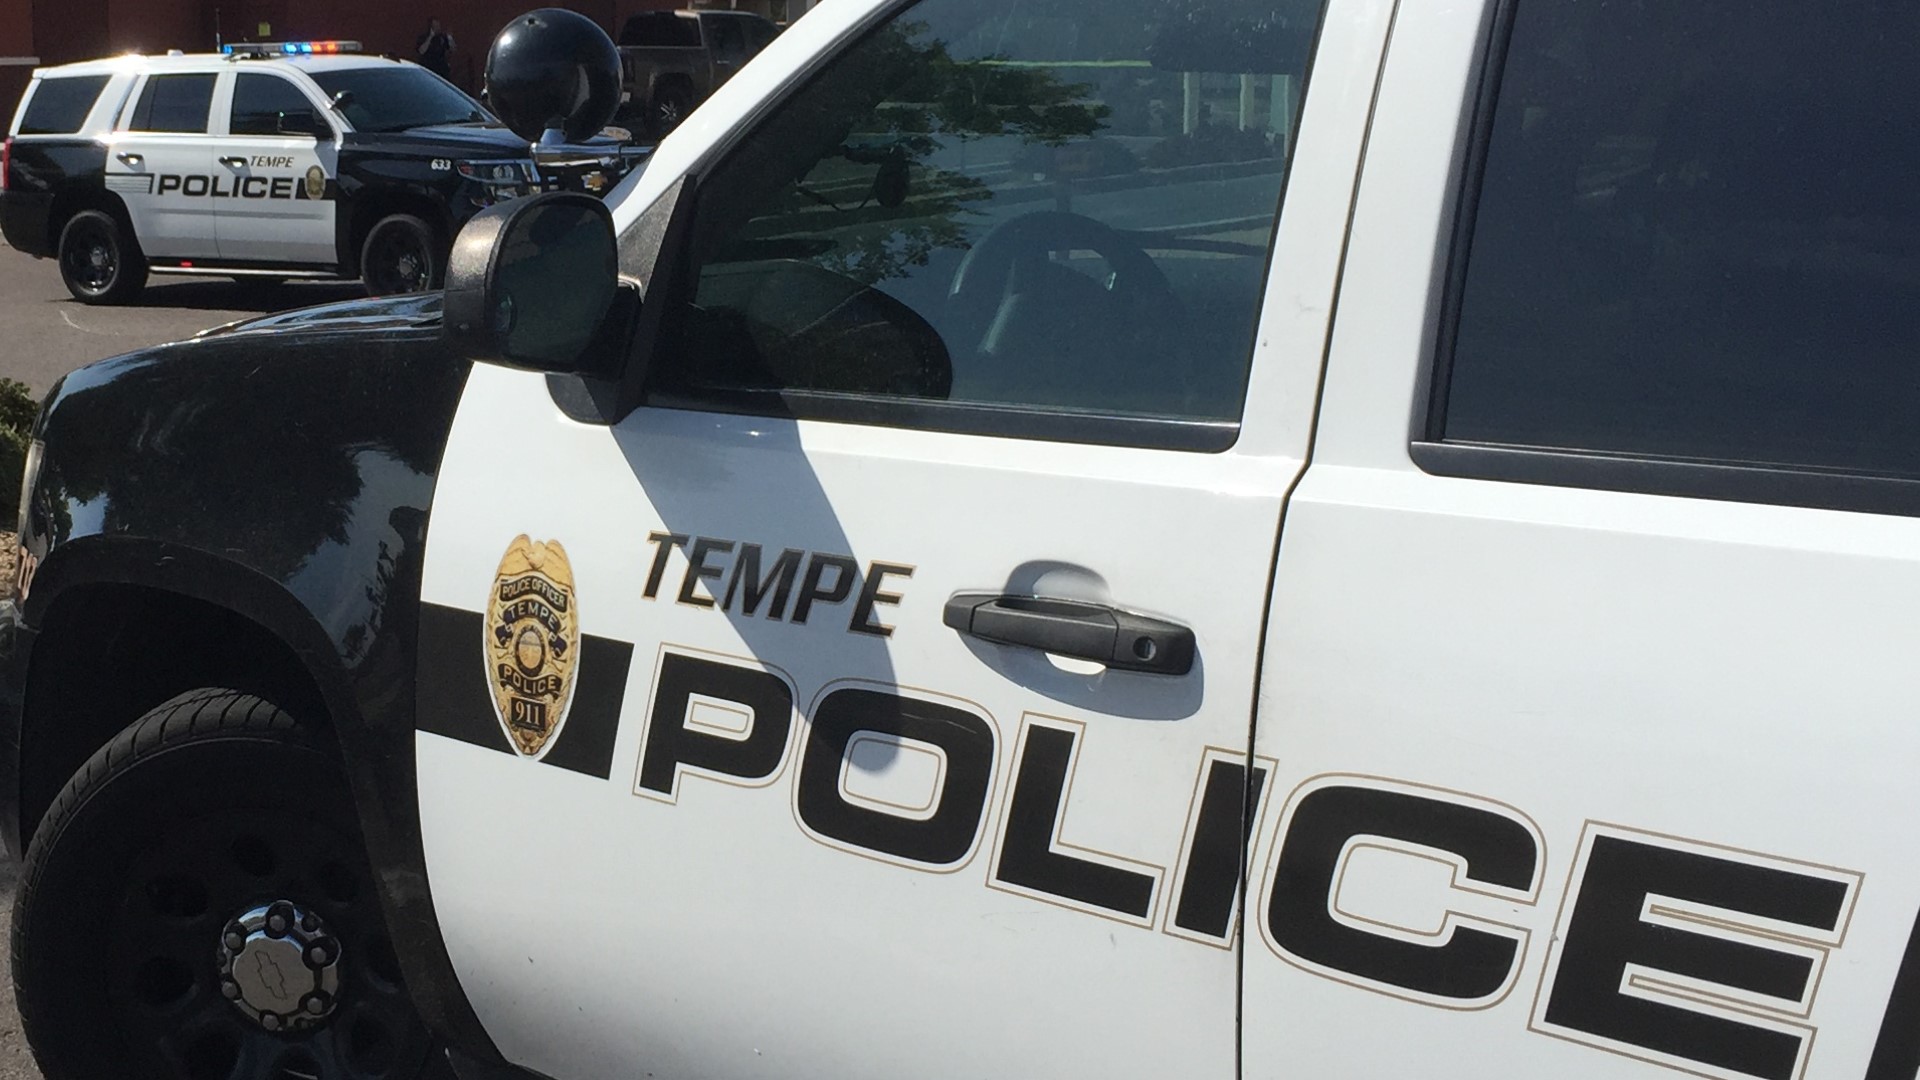 According to an anonymous letter several Tempe police went to a strip club while out of town at a conference and allegedly spent city money at the club. It is still unclear if these allegations are true, but there is no internal investigation into this incident.